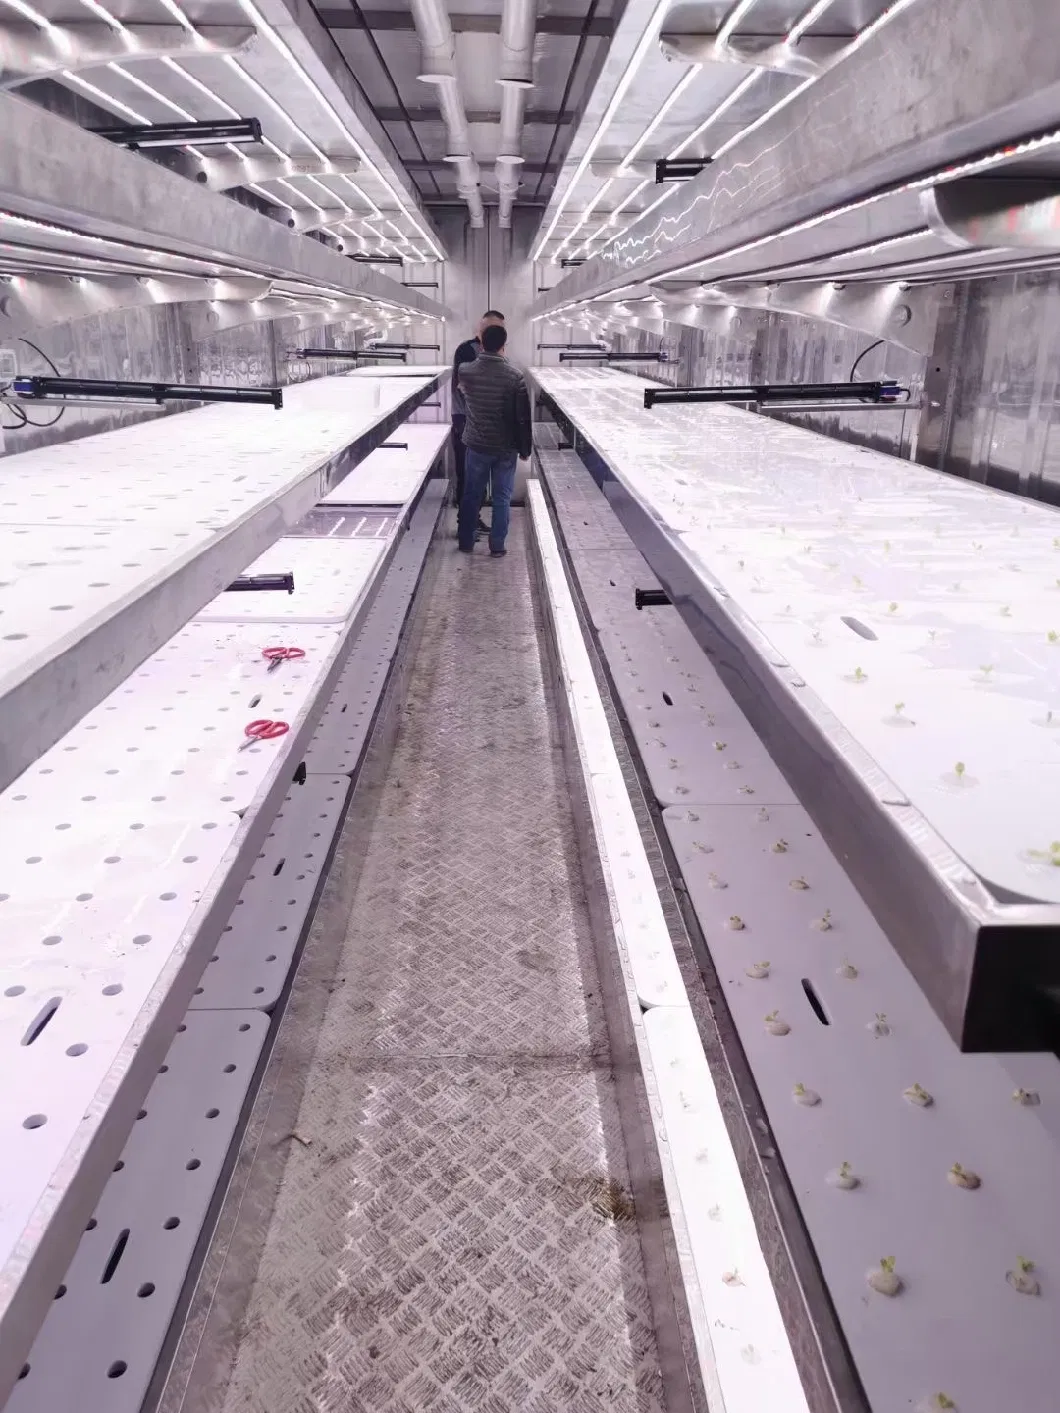 Hydroponic Container Farm/Plant Factory